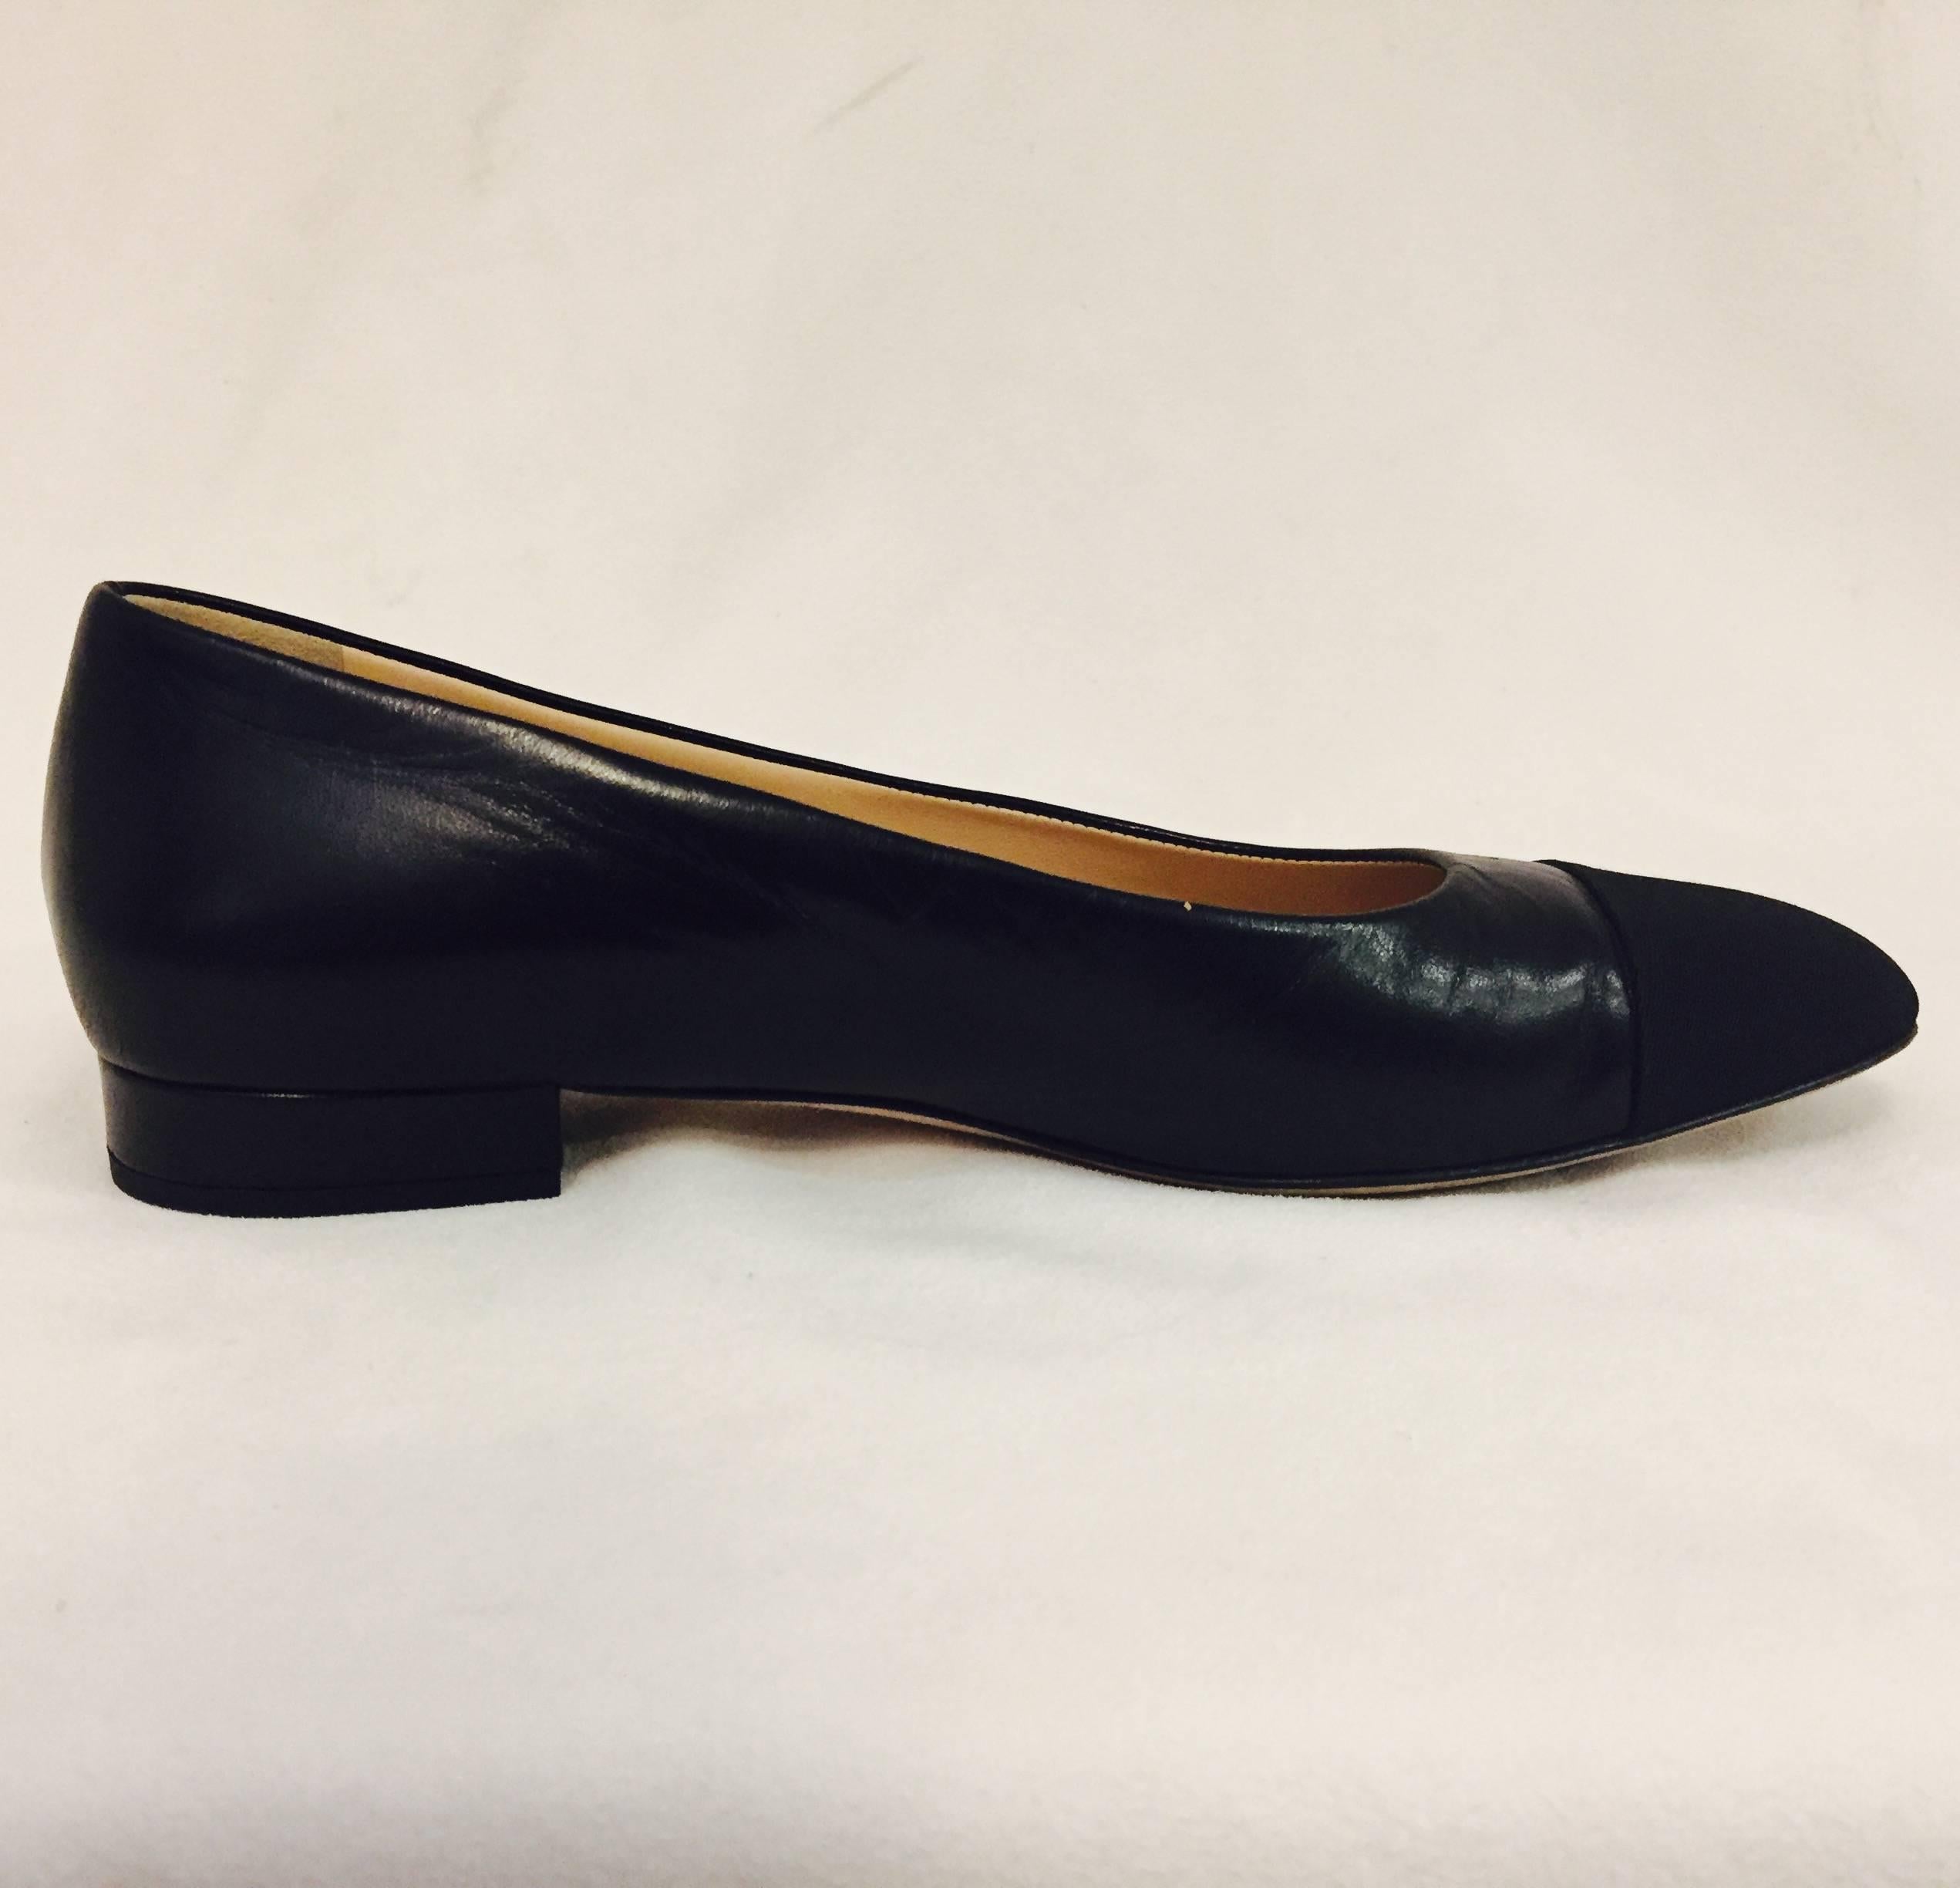 Women's Classic Chanel Black Leather Flats With Black Grosgrain Cap Toes